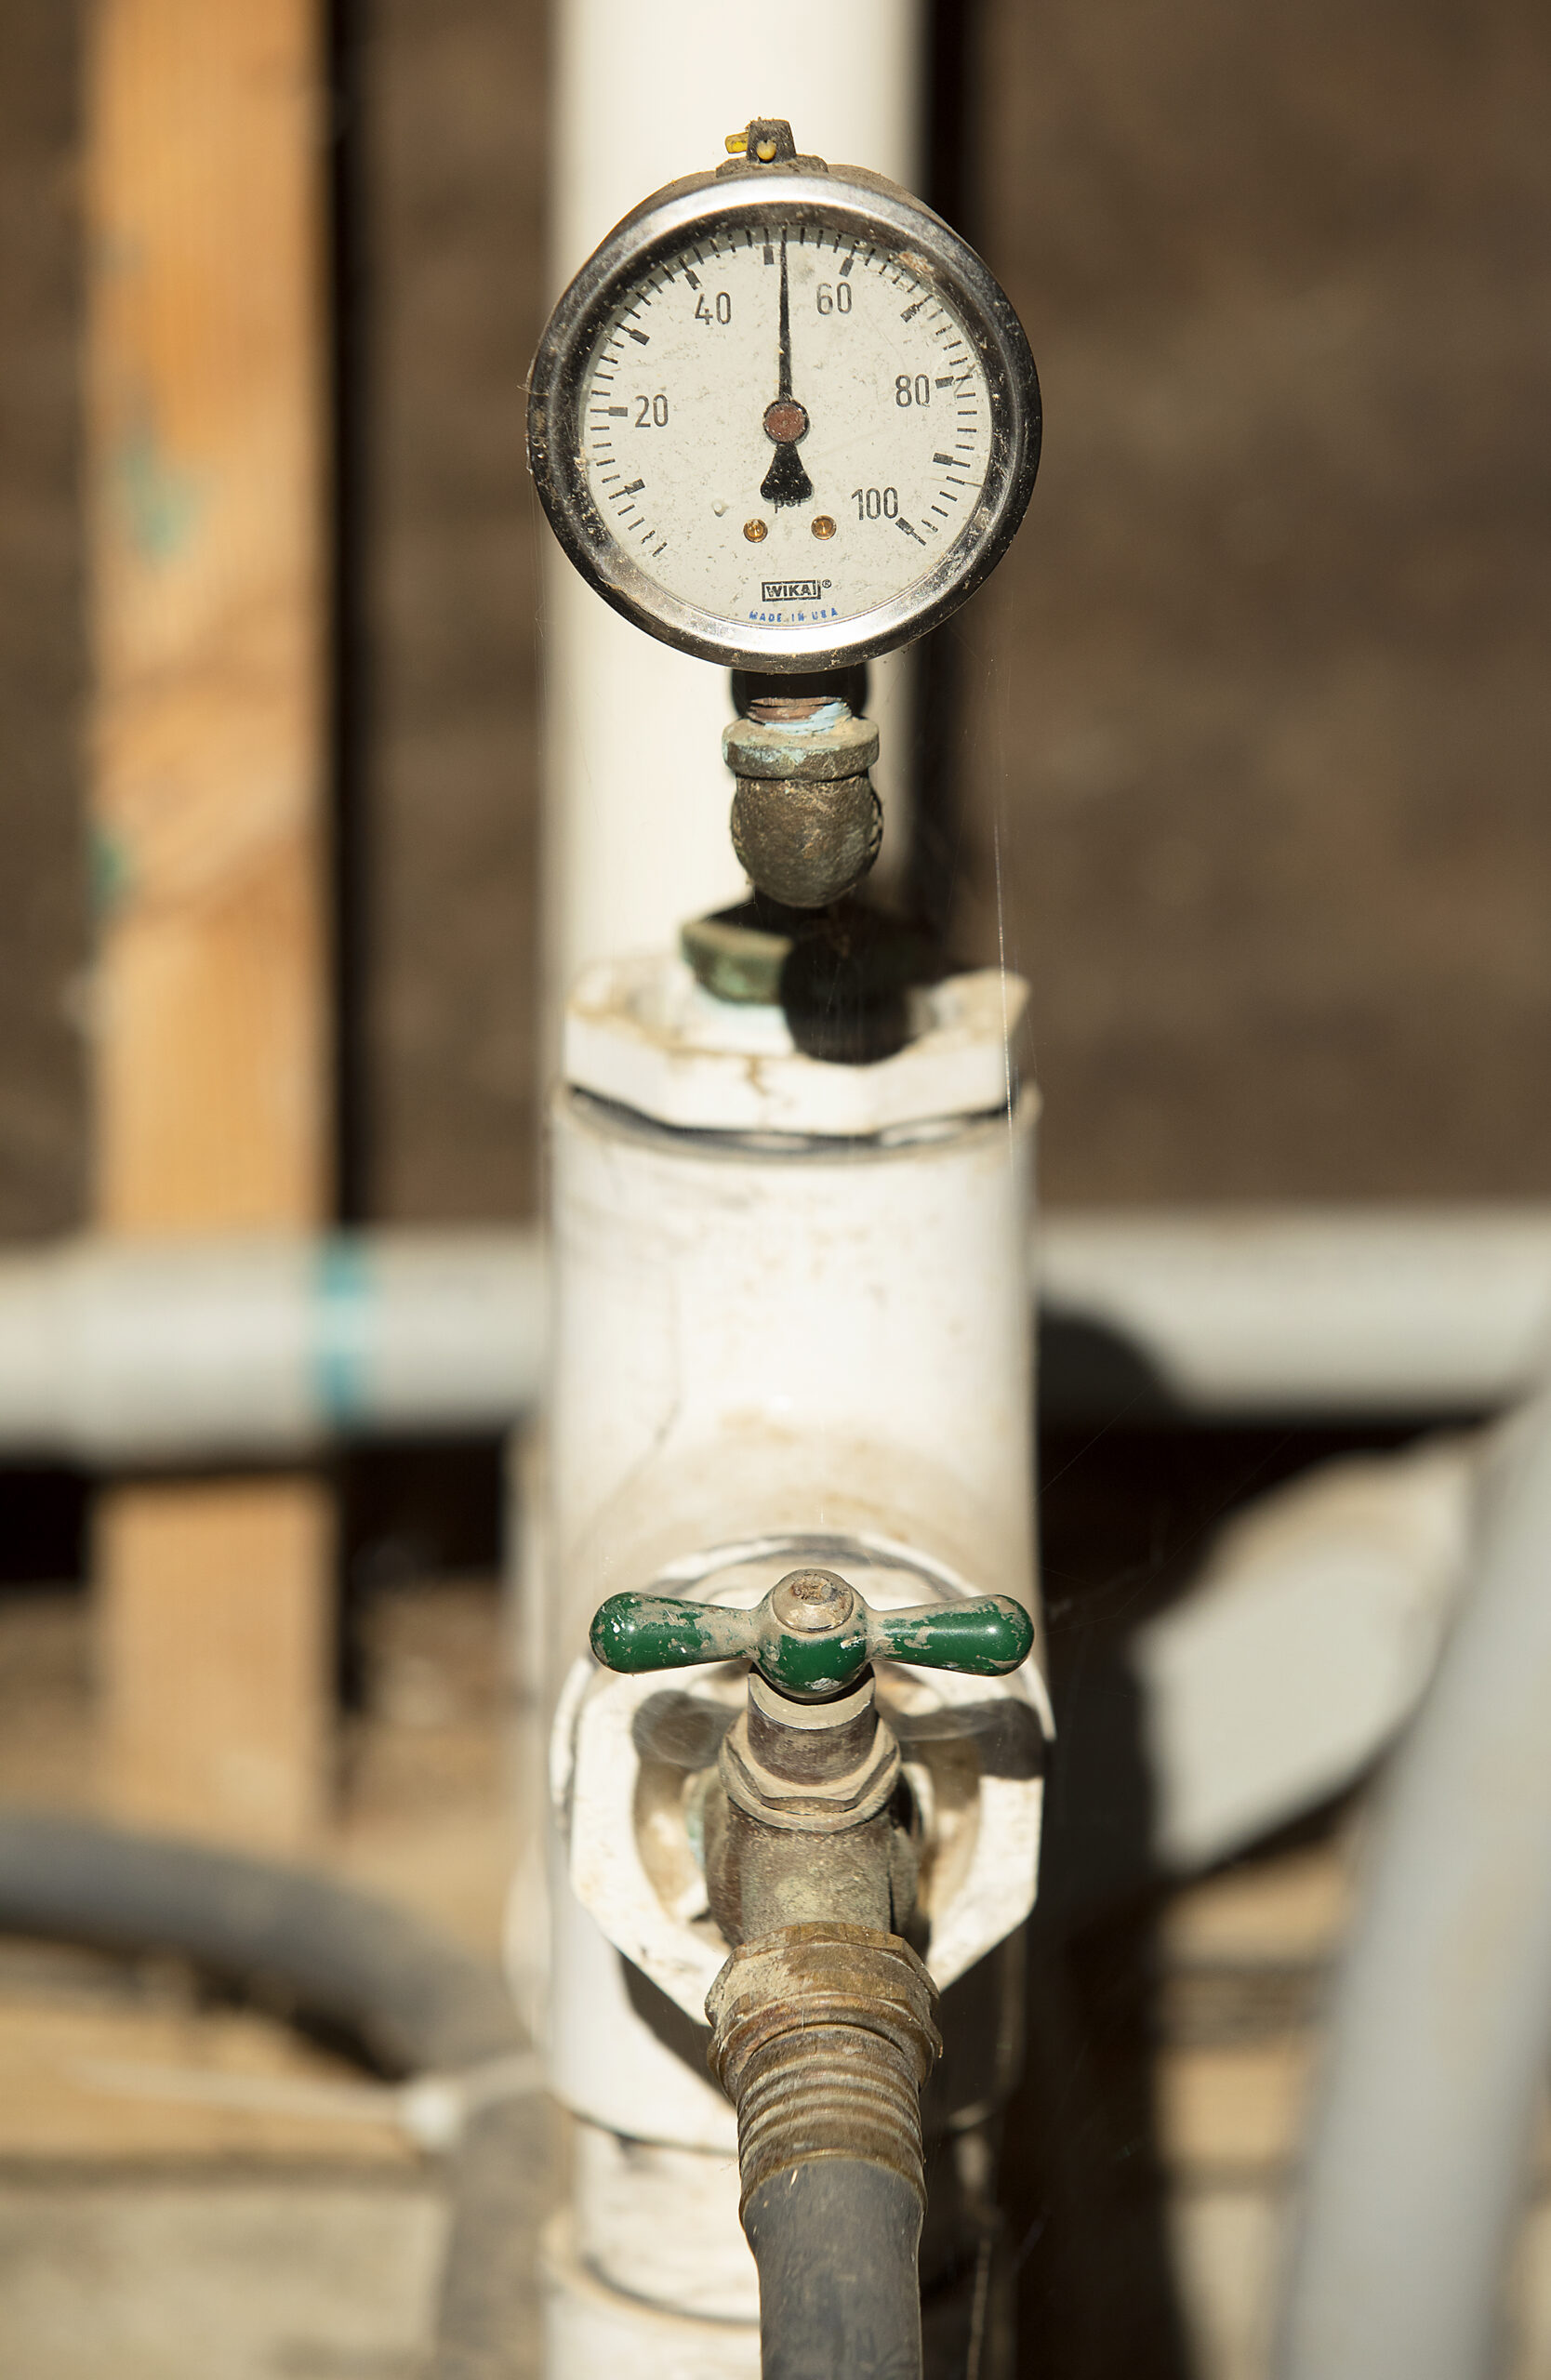 A pressure gauge in the pump house on the rural property of homeowner Kelly Stober. (John Burgess/Sonoma Magazine)